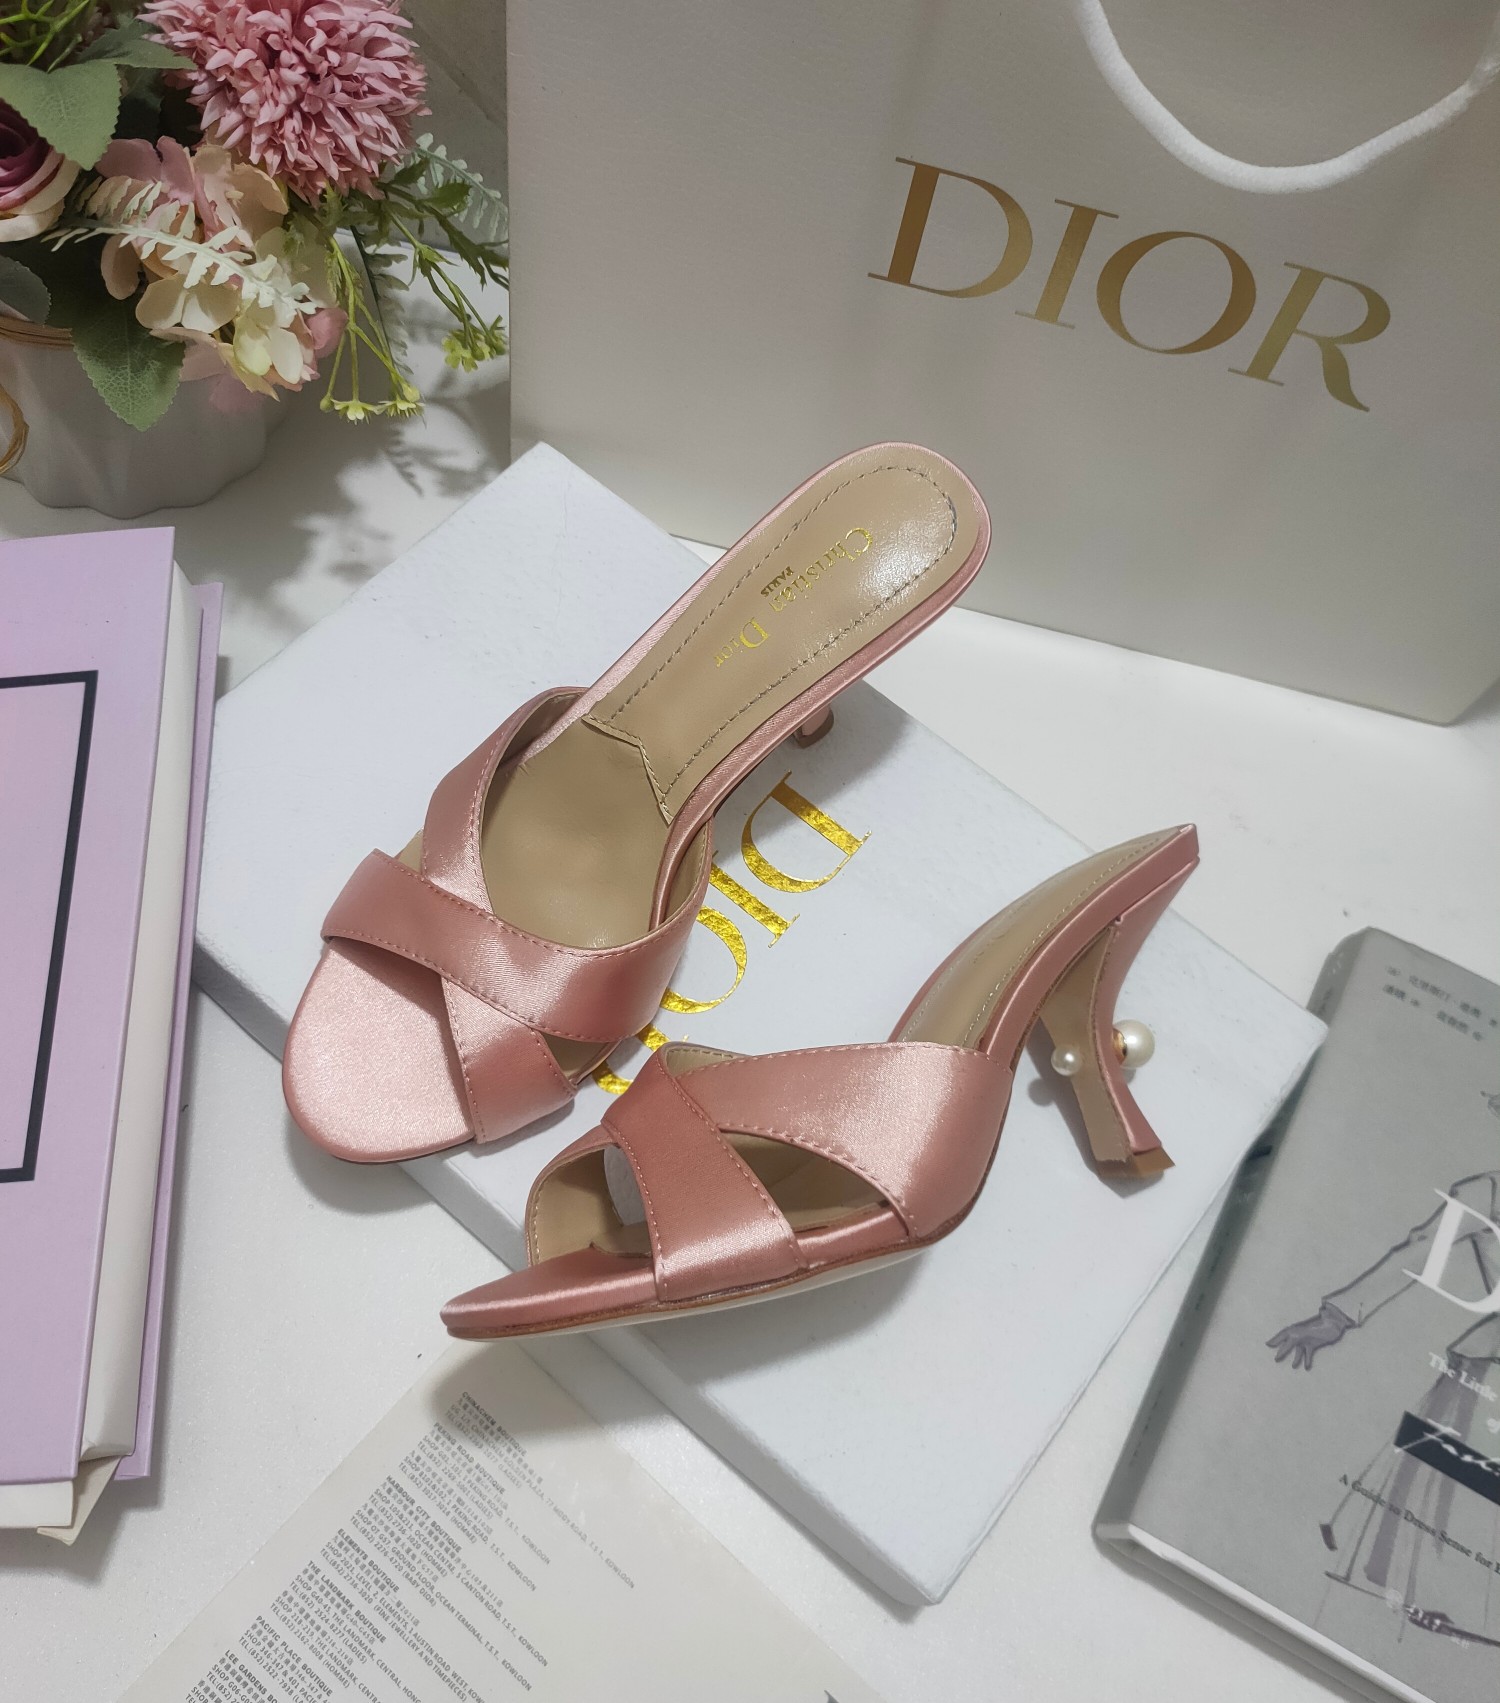 Dior Shoes Mules Knockoff Highest Quality
 Gold White Resin